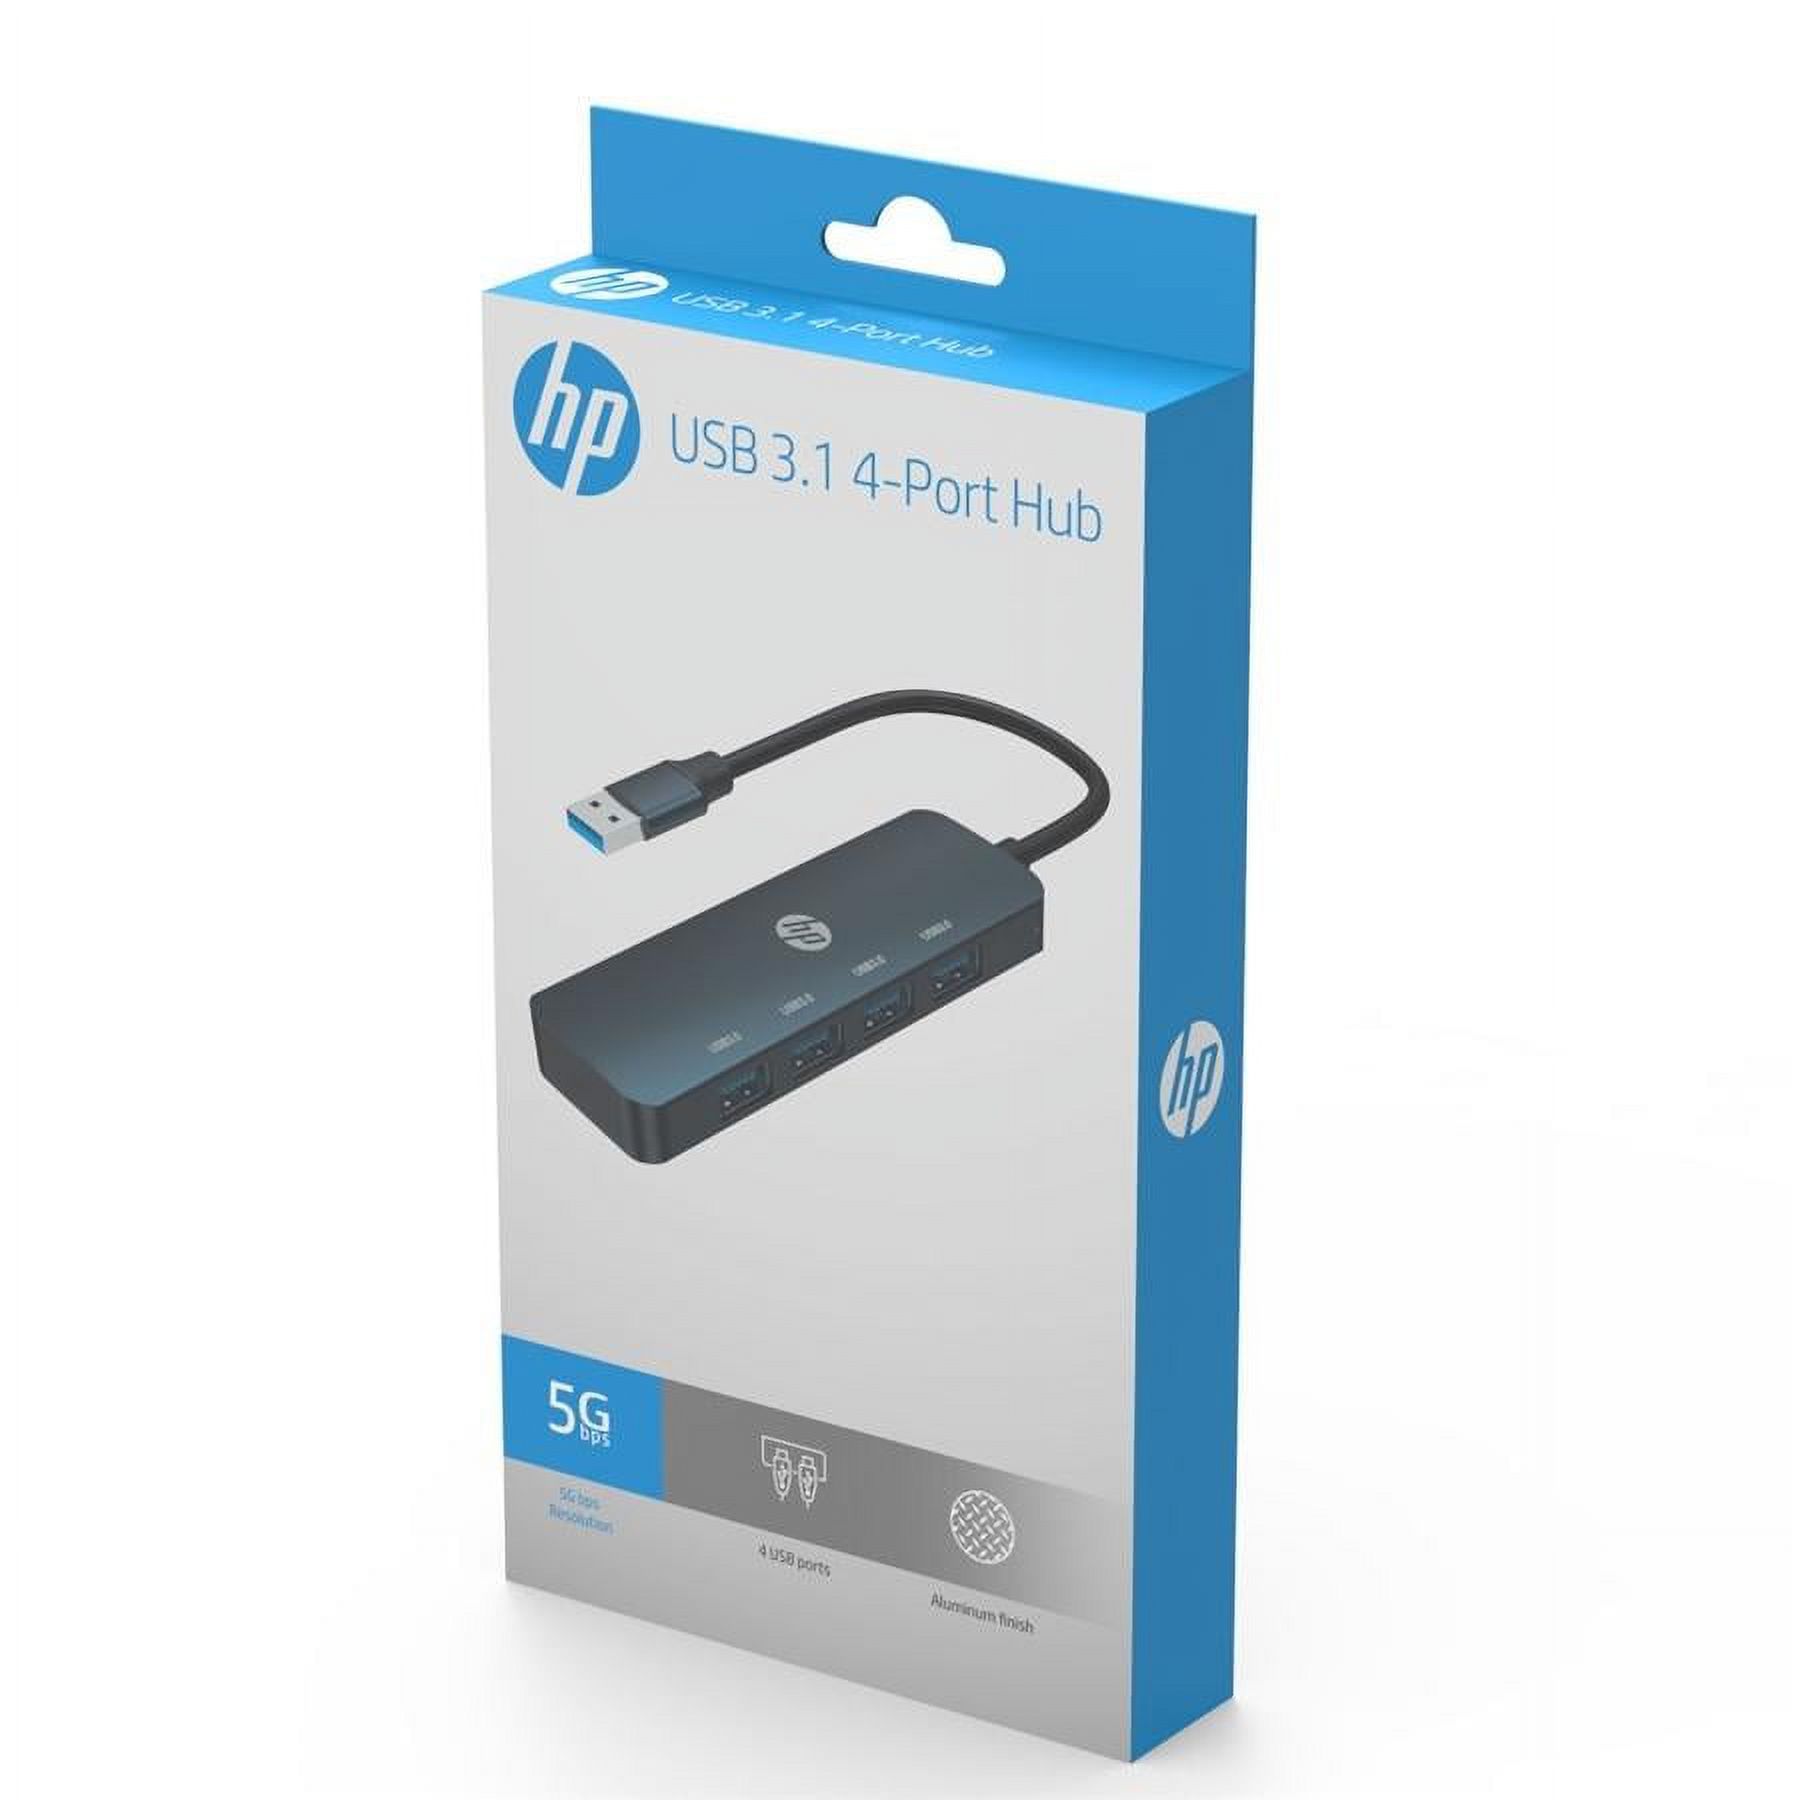 HP - 4 Port USB 3.0 Hub, Up to 5Gbps, Compatible with USB2.0 / USB1.1 for Mac, PC or Mobile Hard Drive, Black - image 5 of 5